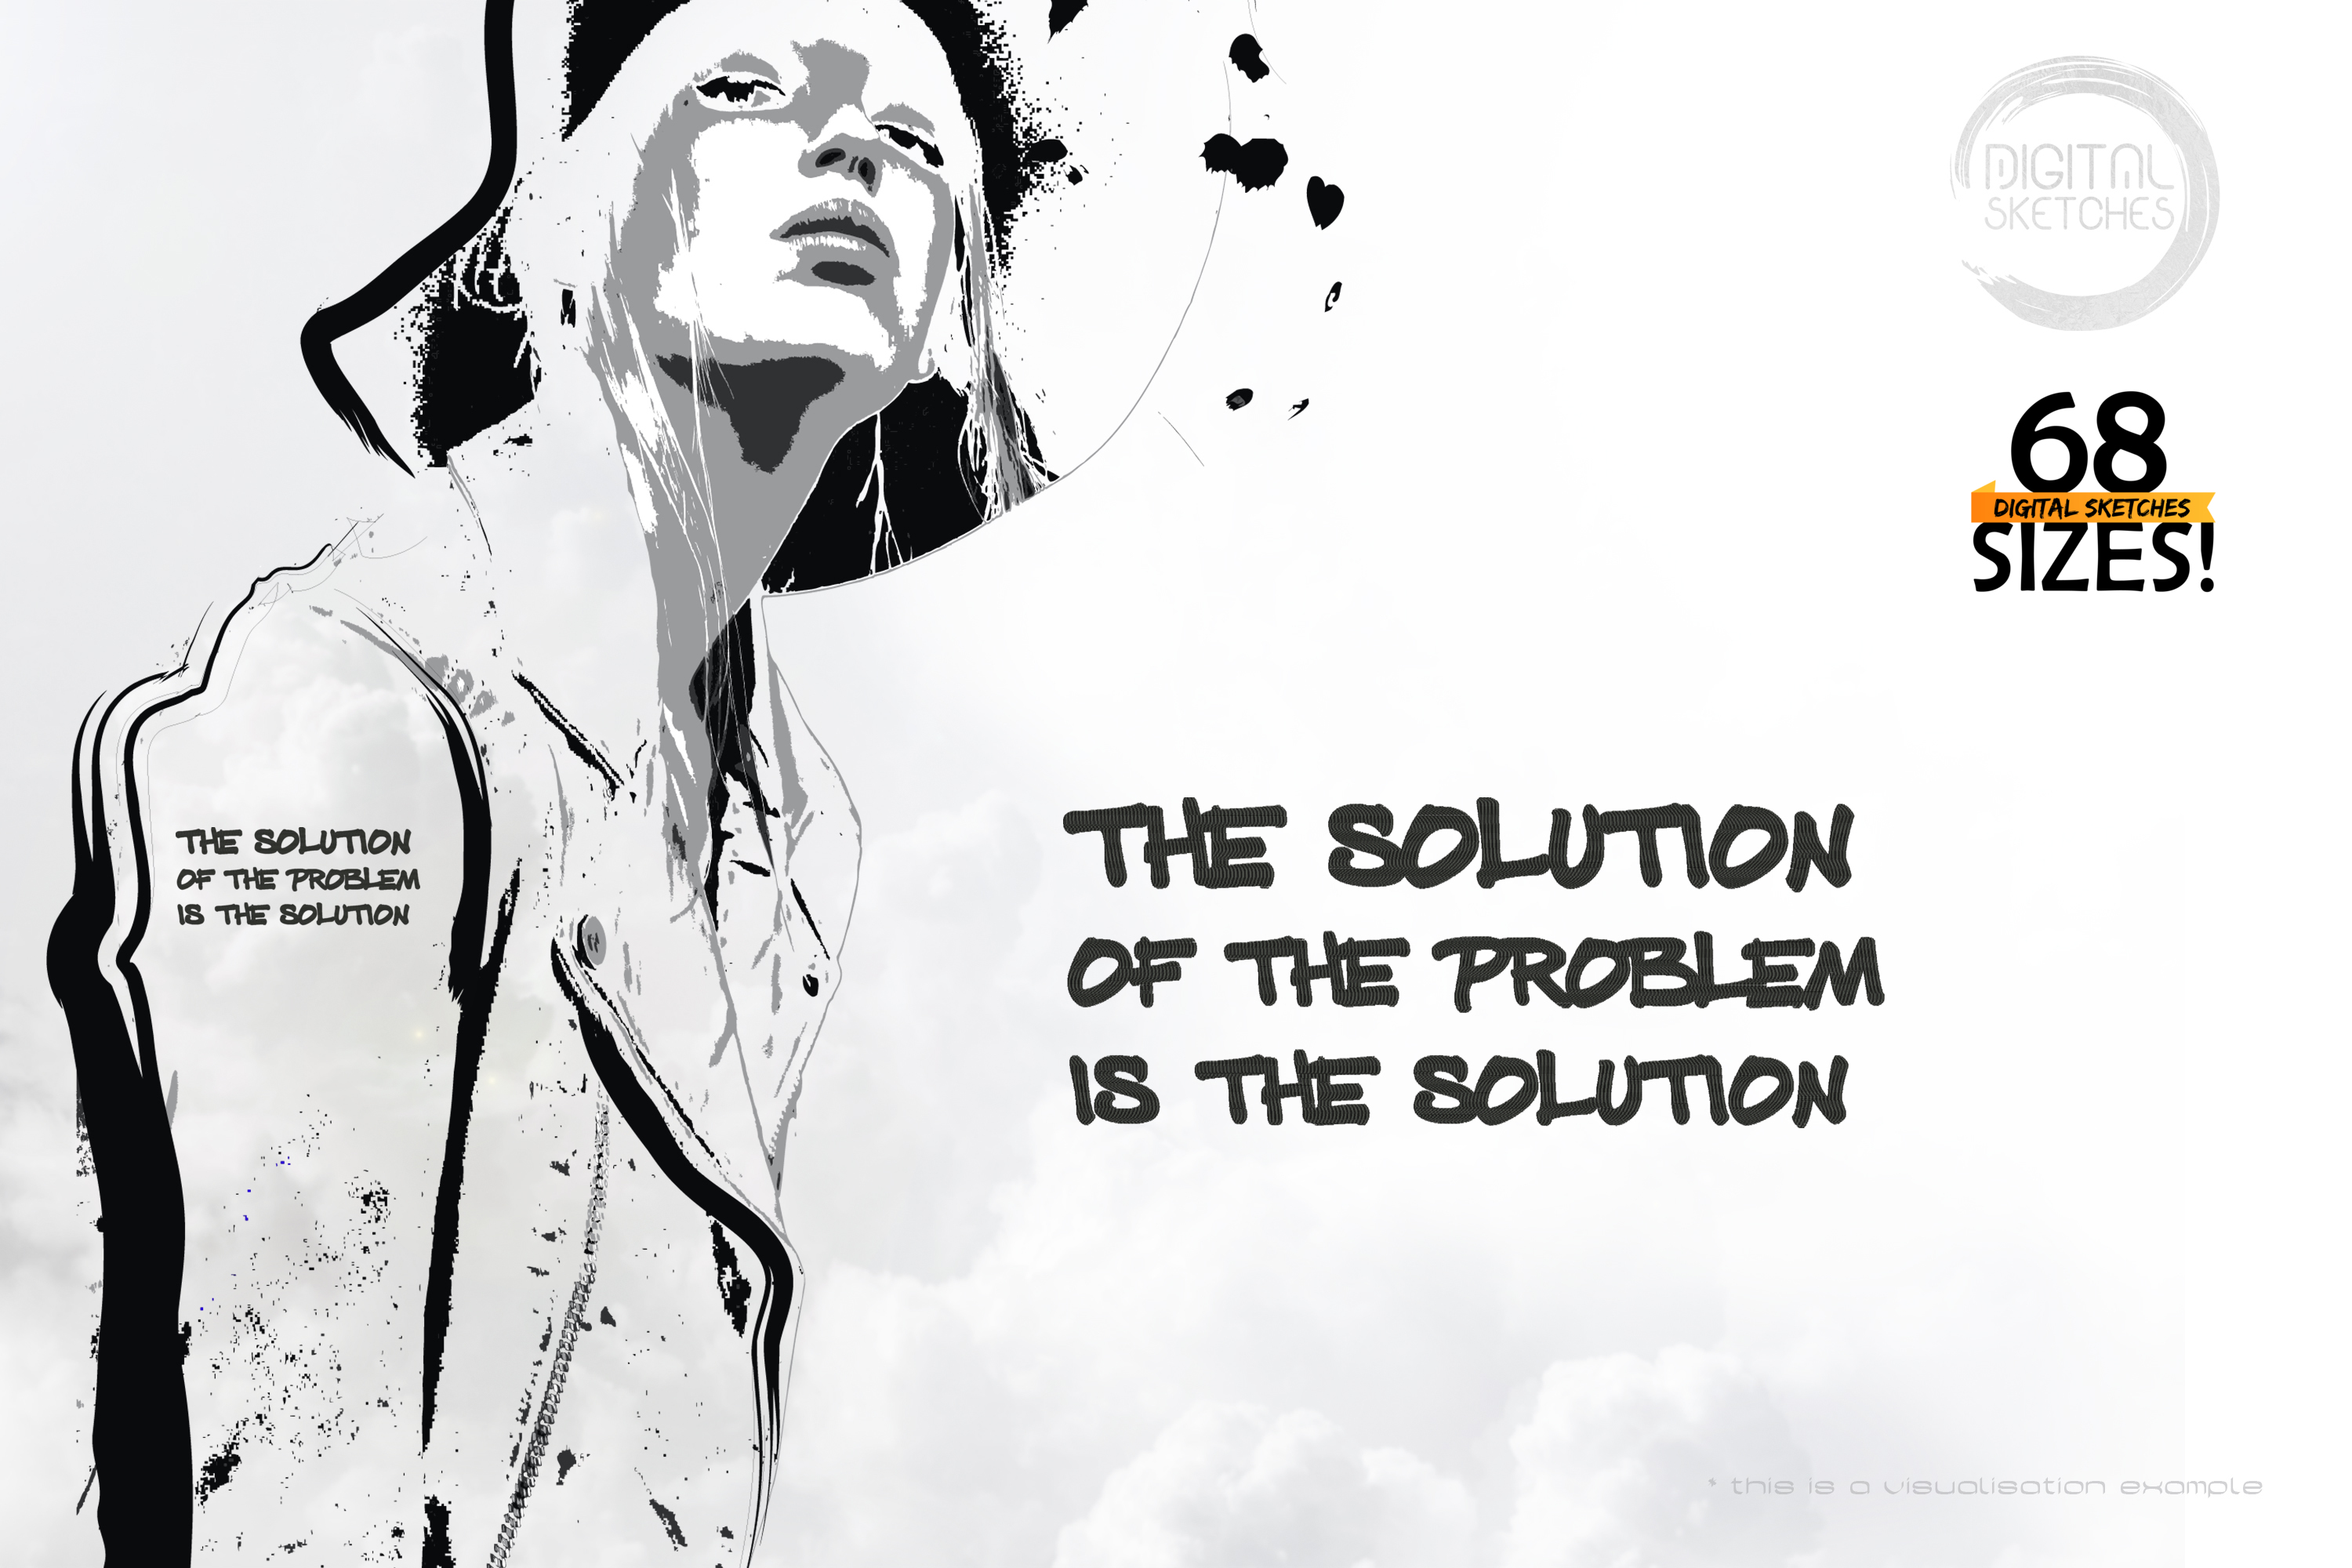 The Solution